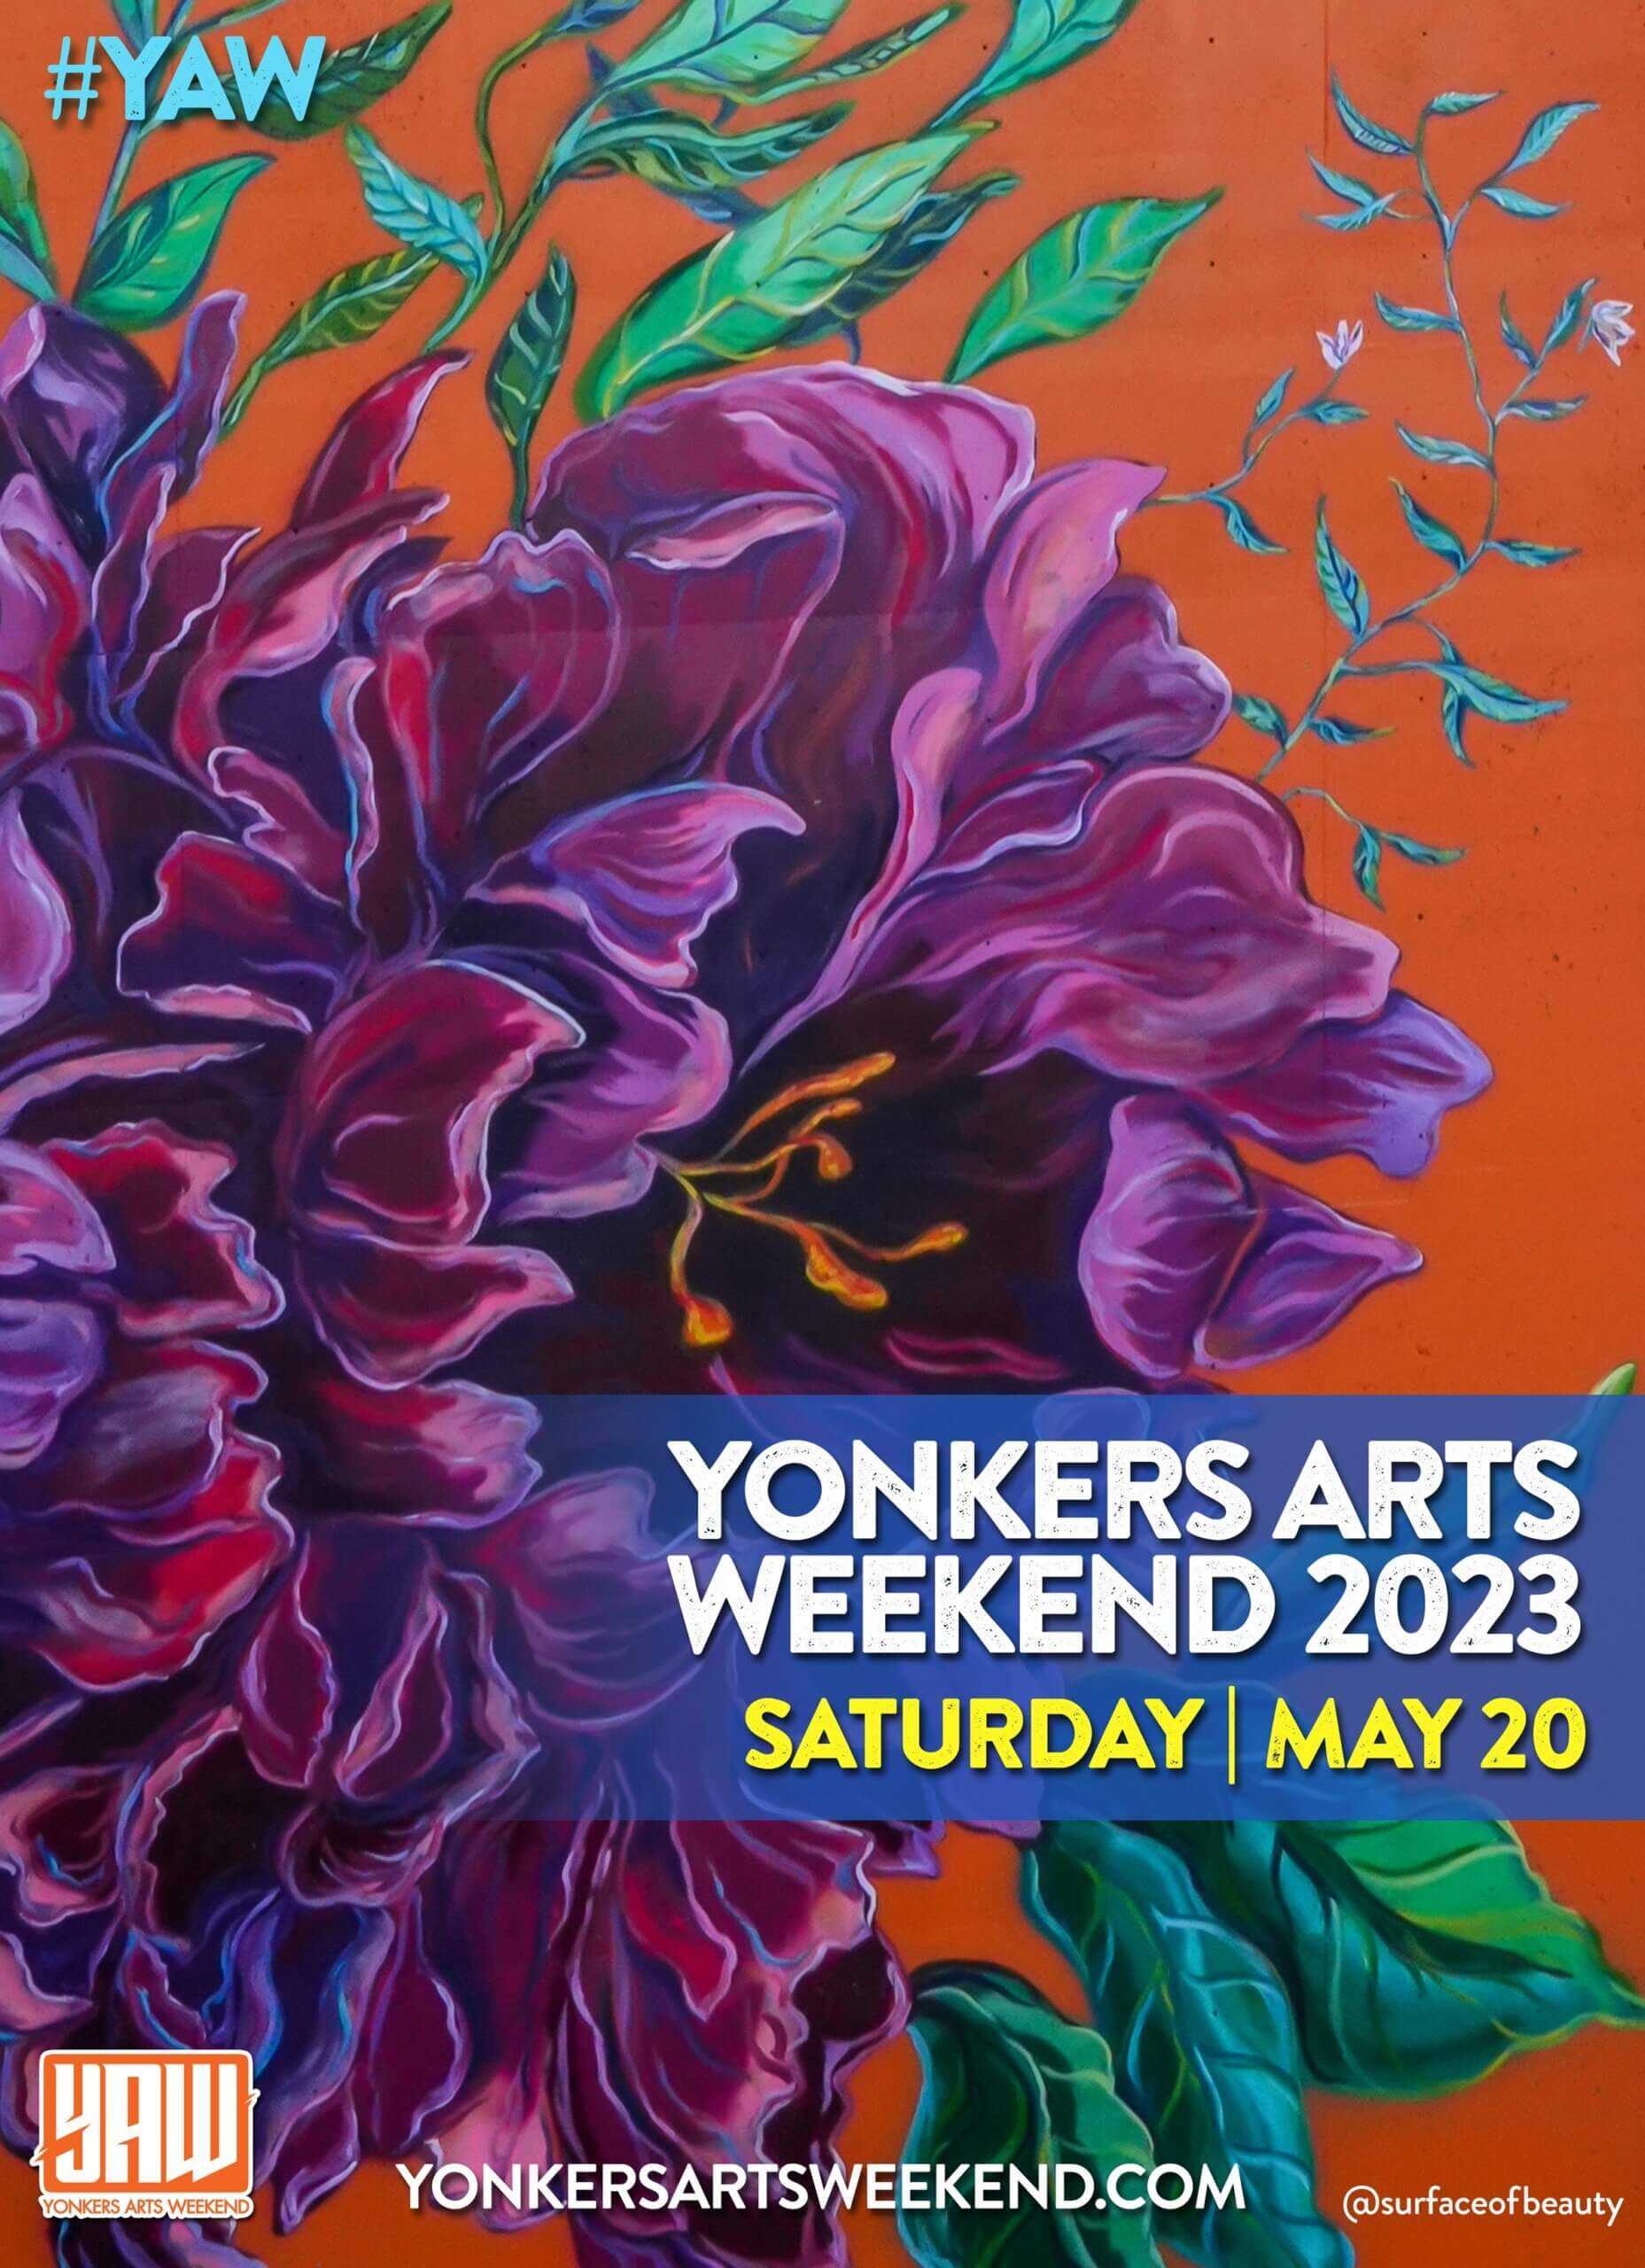 "Yonkers Arts Weekend 2023 Saturday May 20" image of purple flower with orange background @surfaceofbeauty